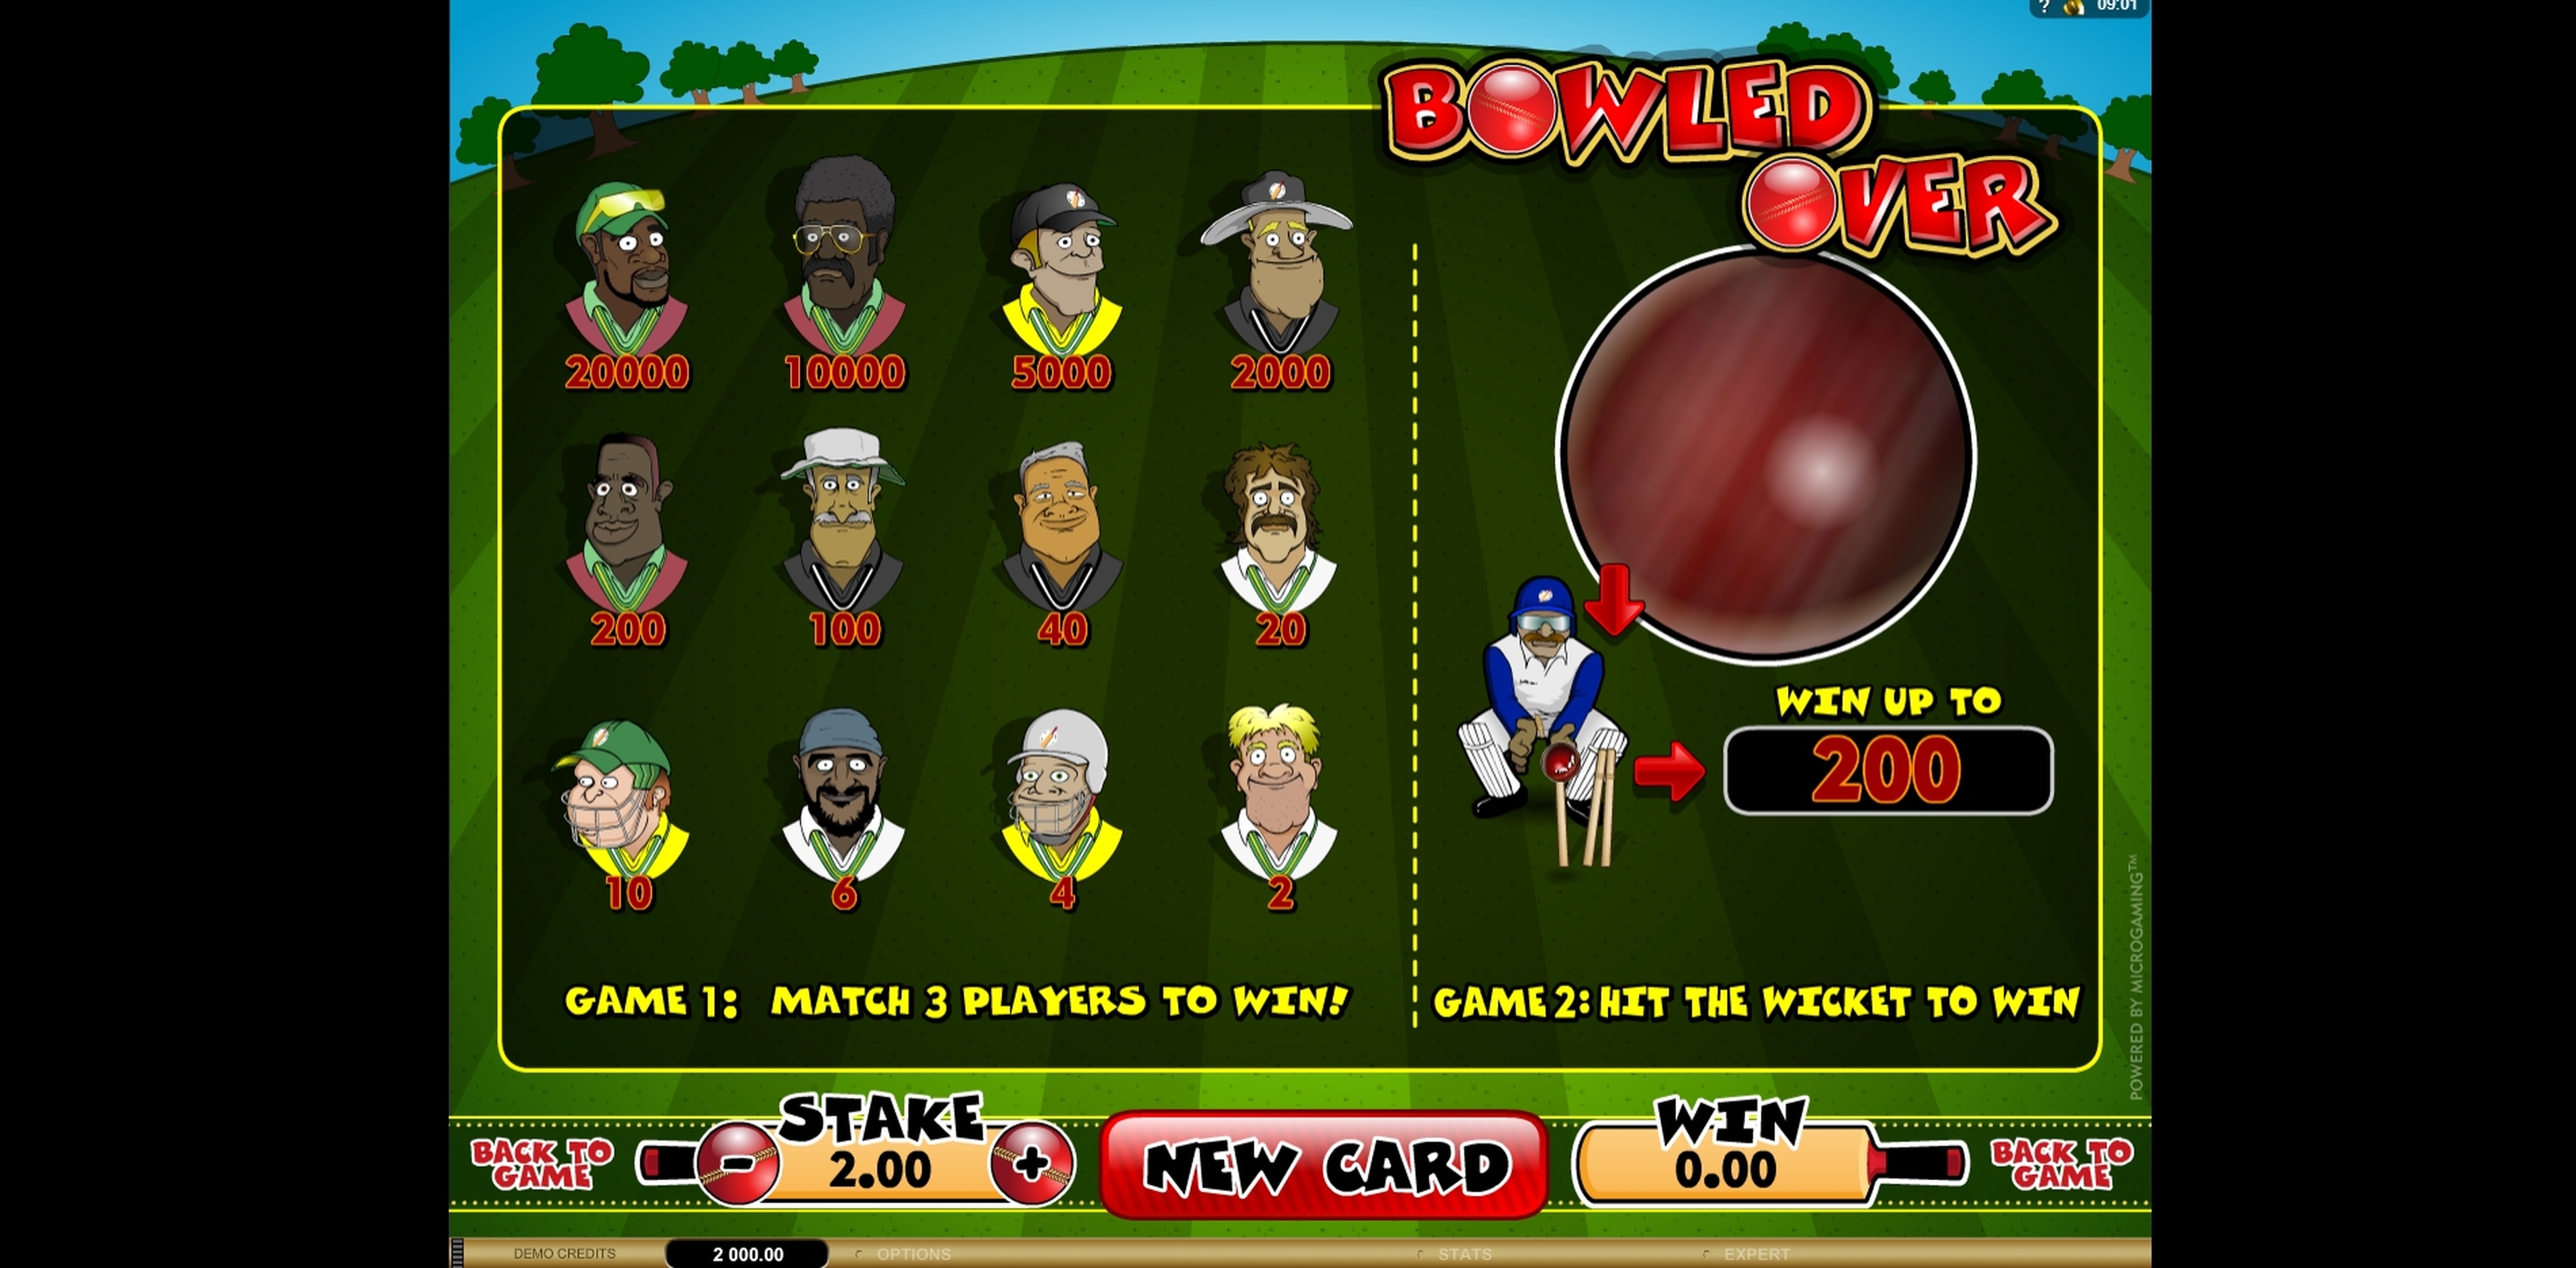 Info of Bowled Over Slot Game by Microgaming